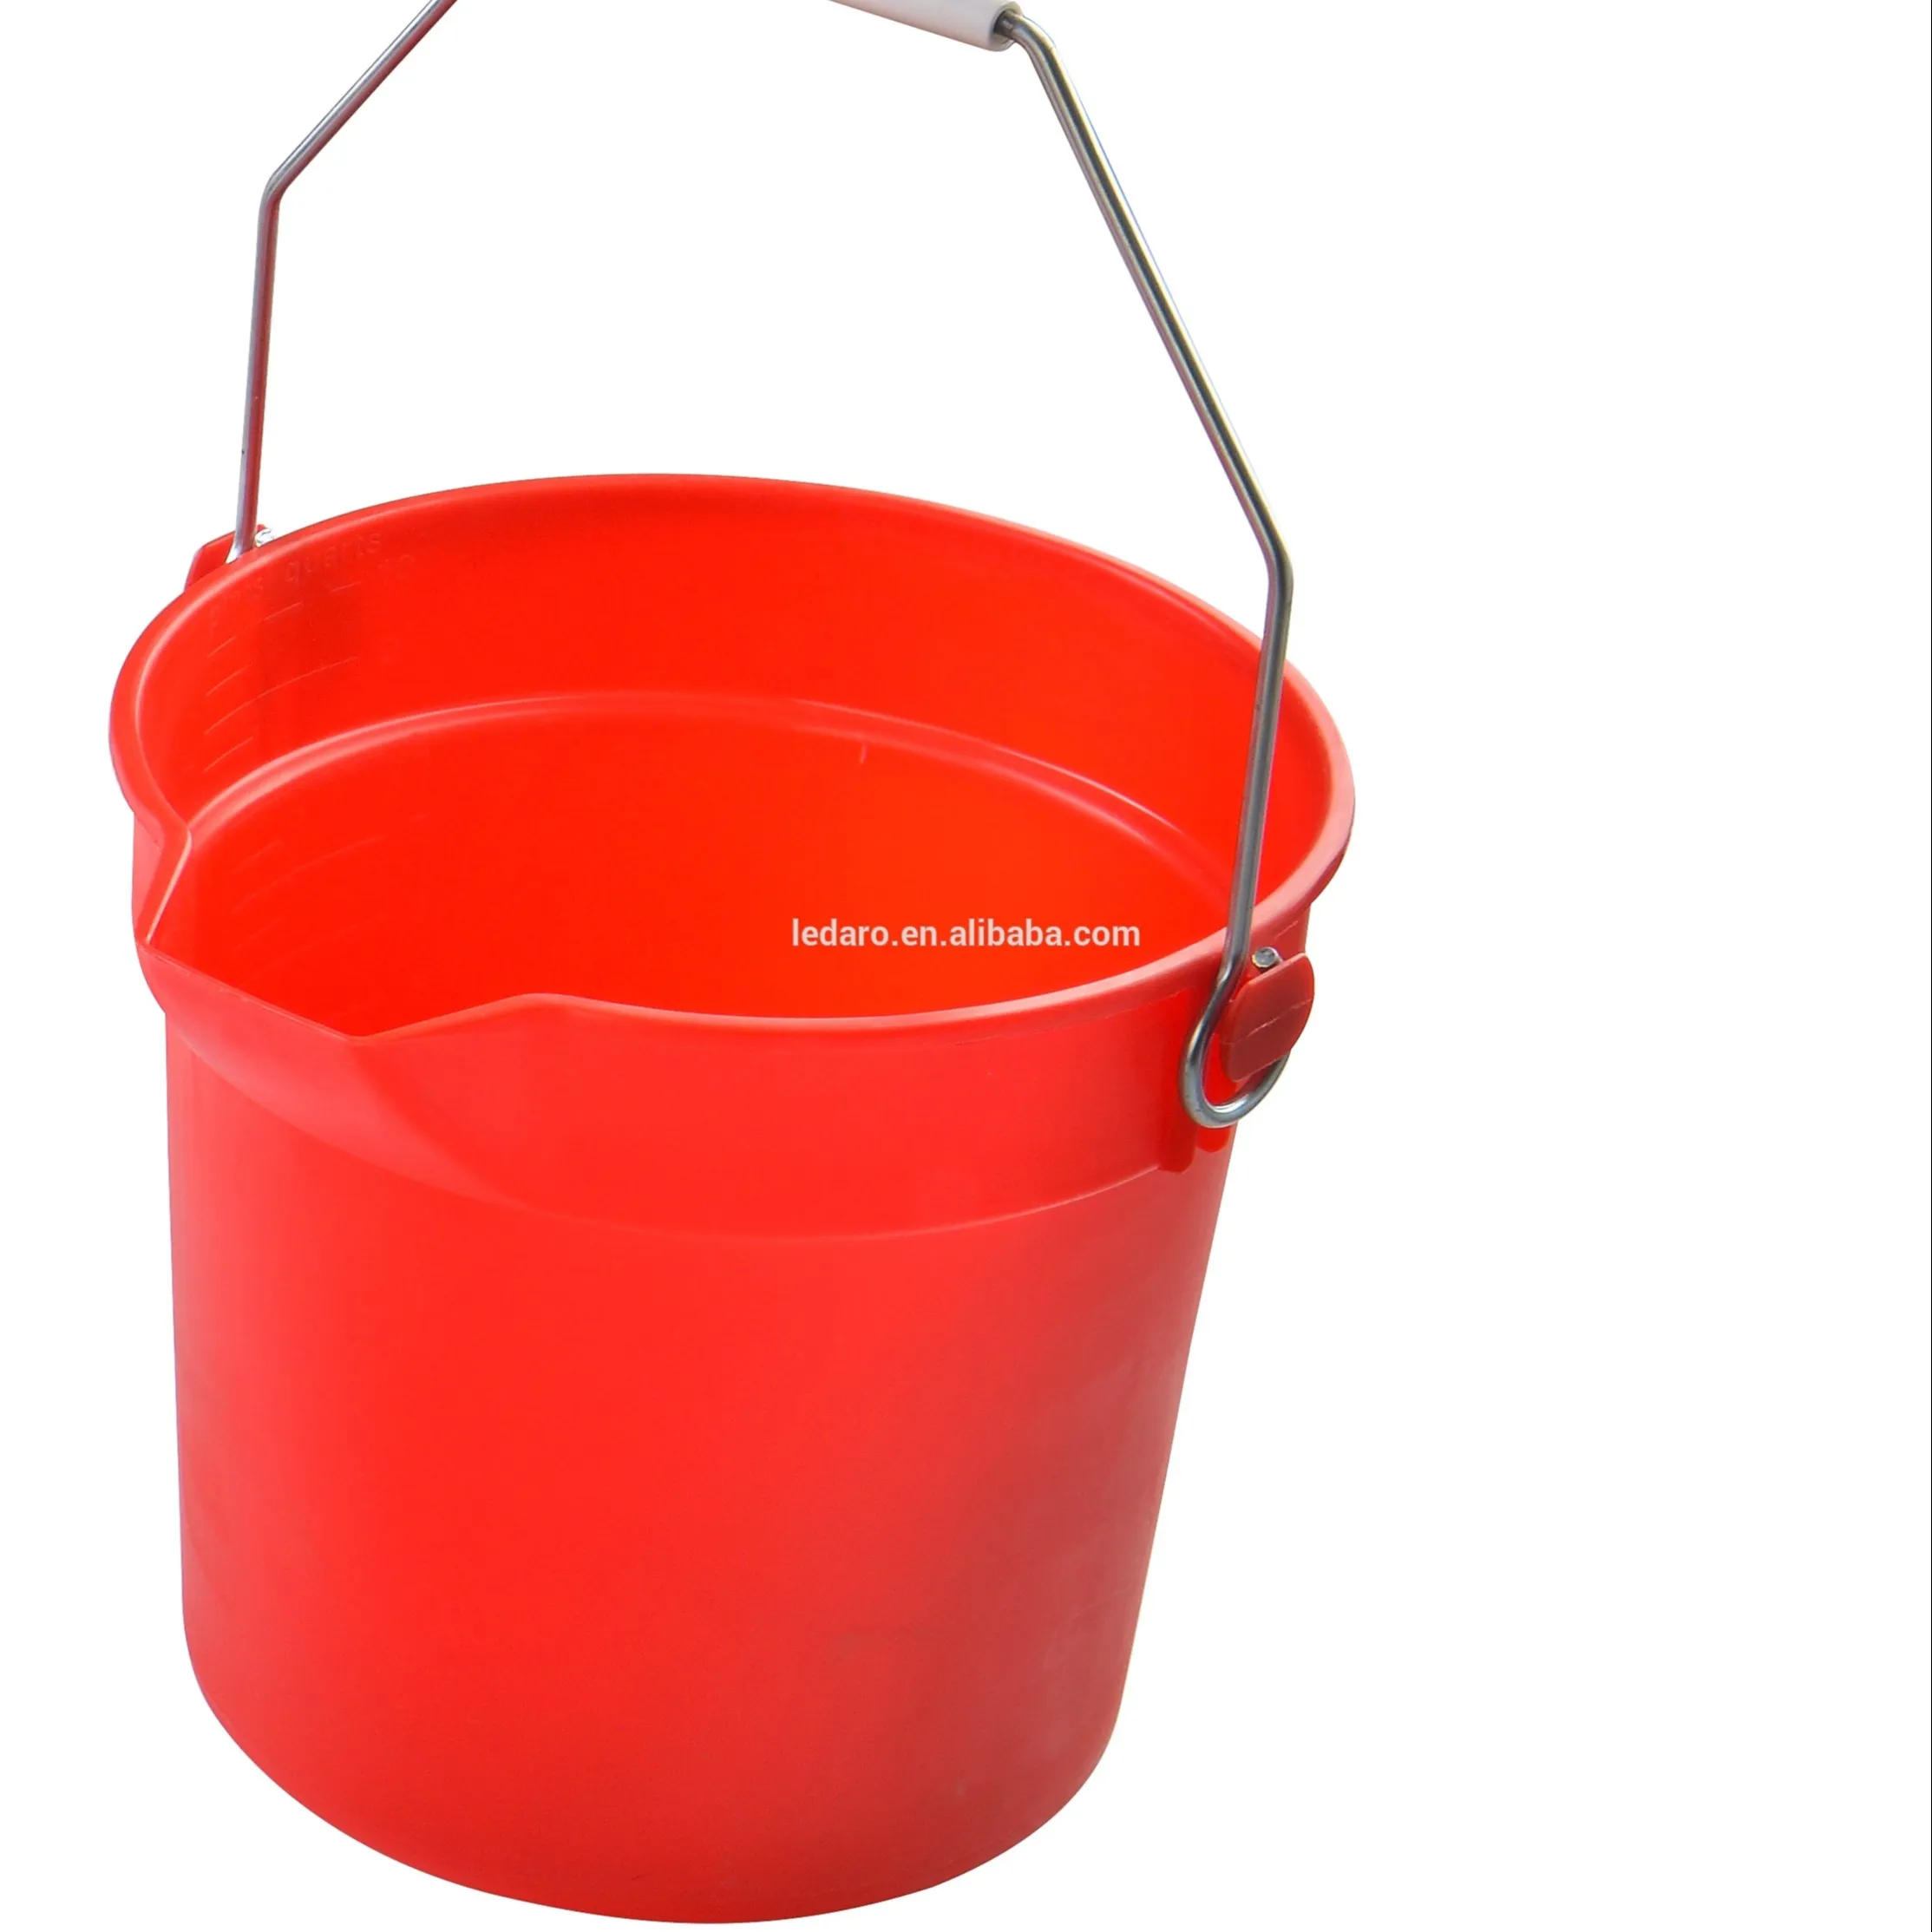 Commercial Products 10L Brute Heavy Duty, Corrosive-resistant, Round Bucket Mop Bucket BUCKETS Plastic Eco-friendly